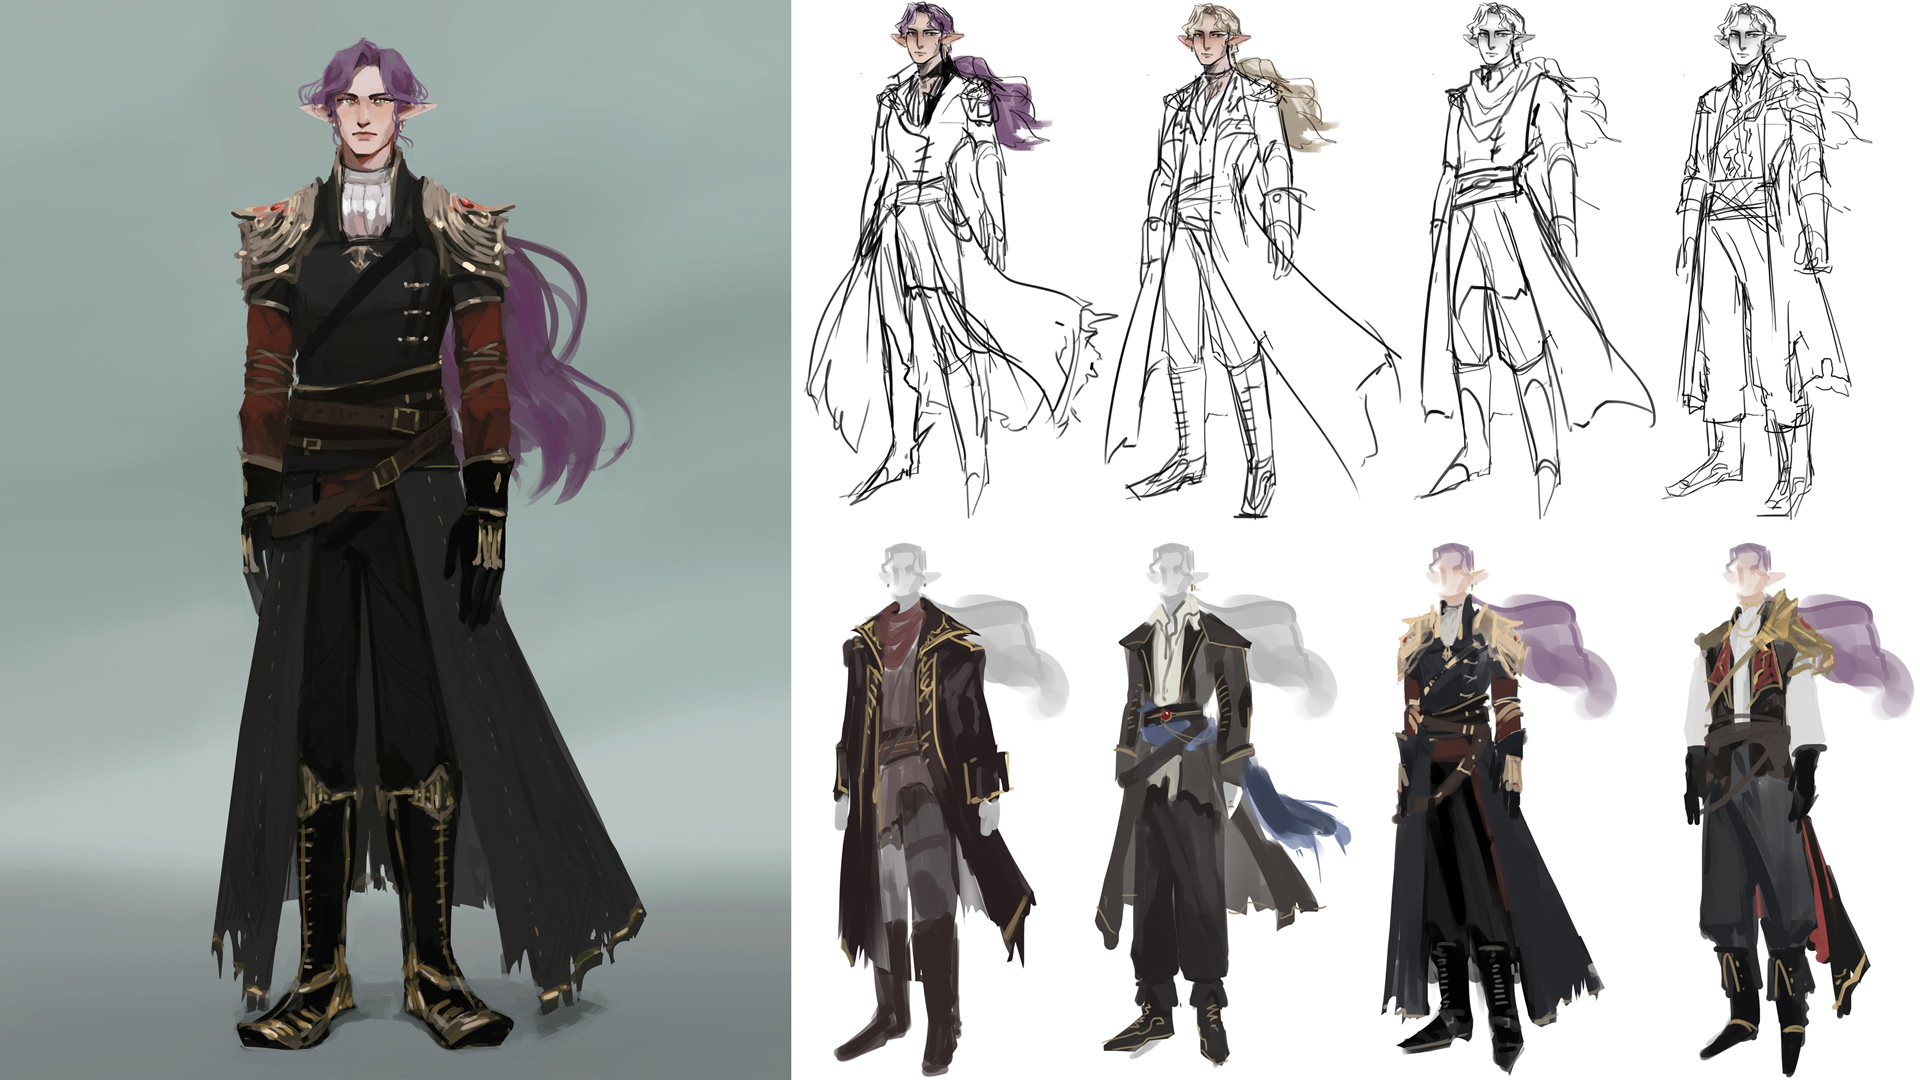 A purpled hair androgenous woman wearing an embellished coat. There are four line sketches followed by four painted sketches all showing different outfits.